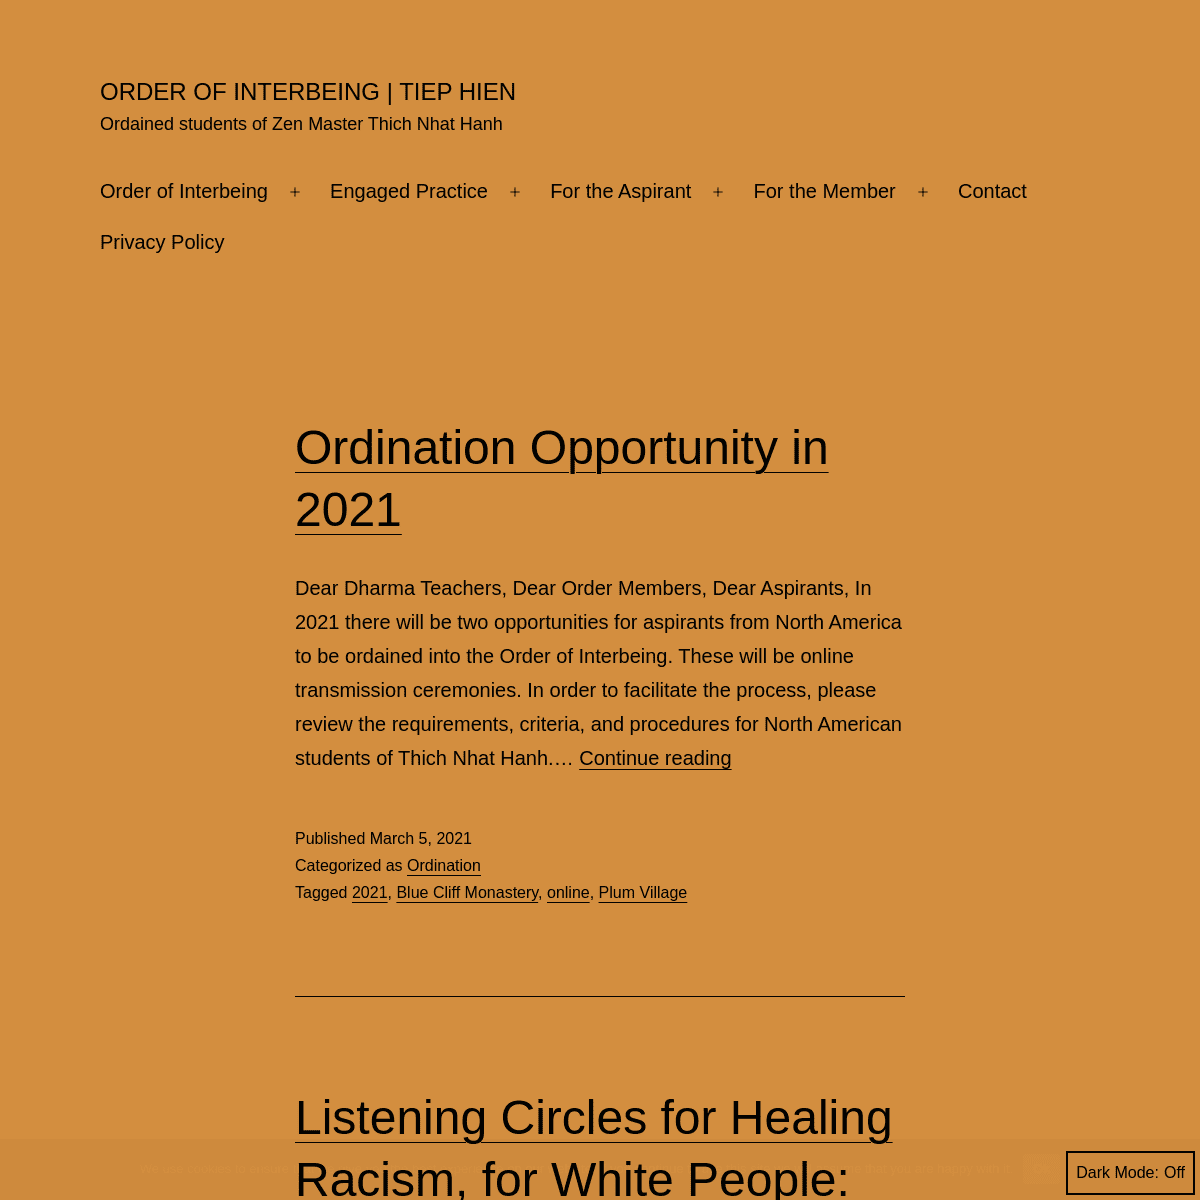 A complete backup of https://orderofinterbeing.org